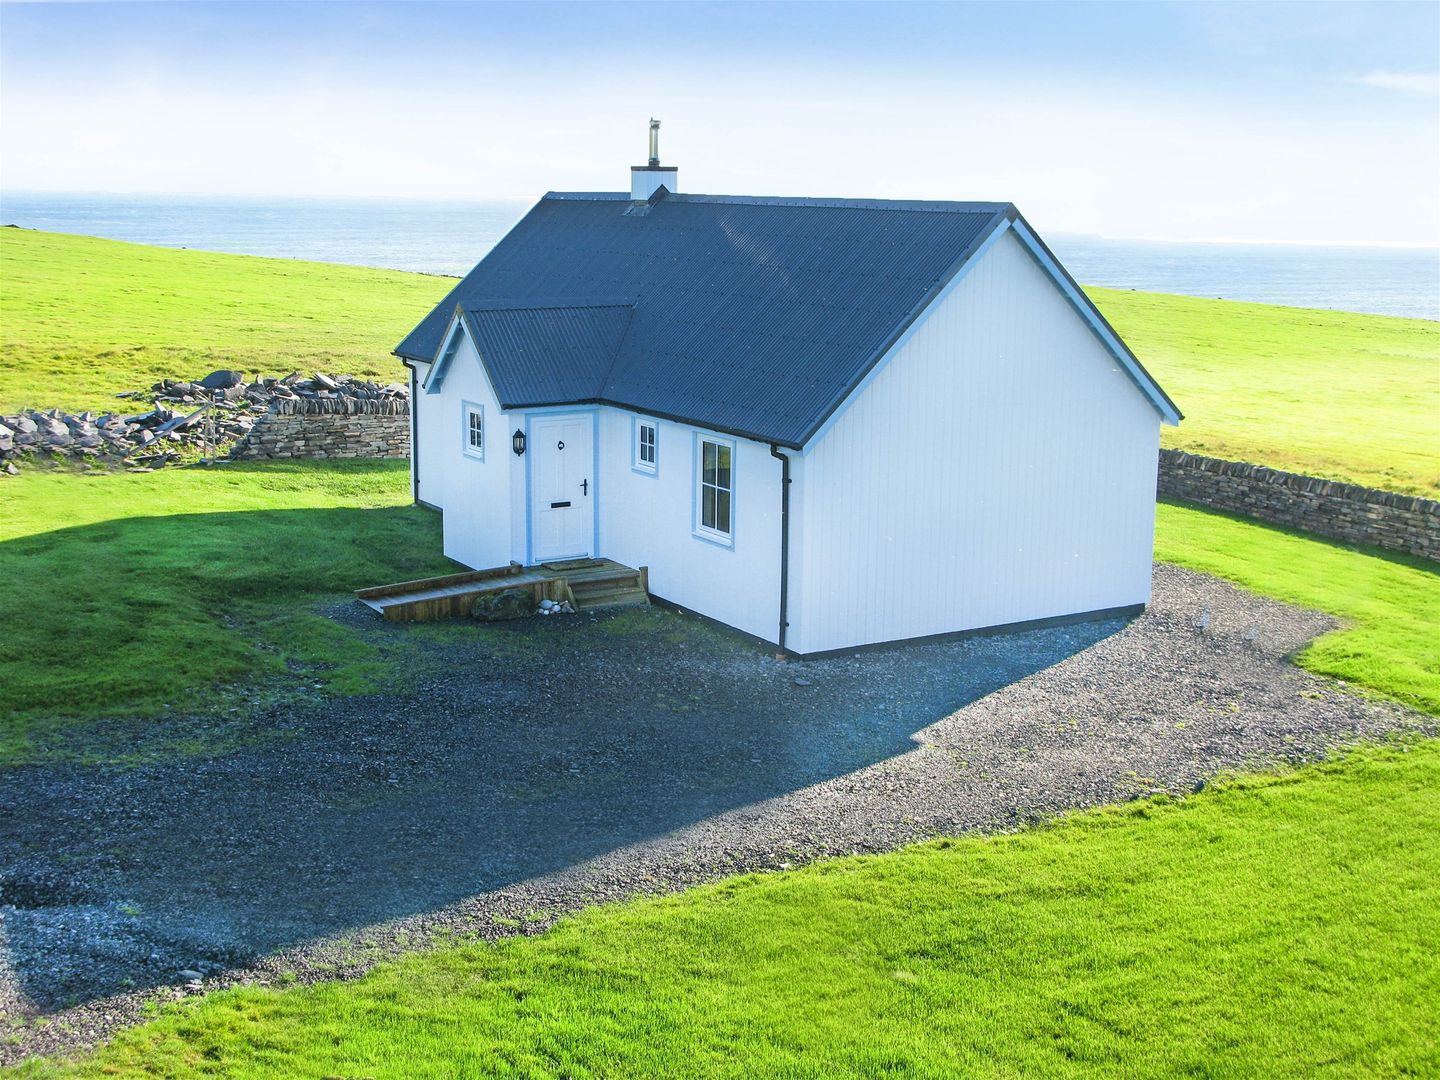 Two Bedroom Wee House - Caithness , The Wee House Company The Wee House Company Casas clássicas